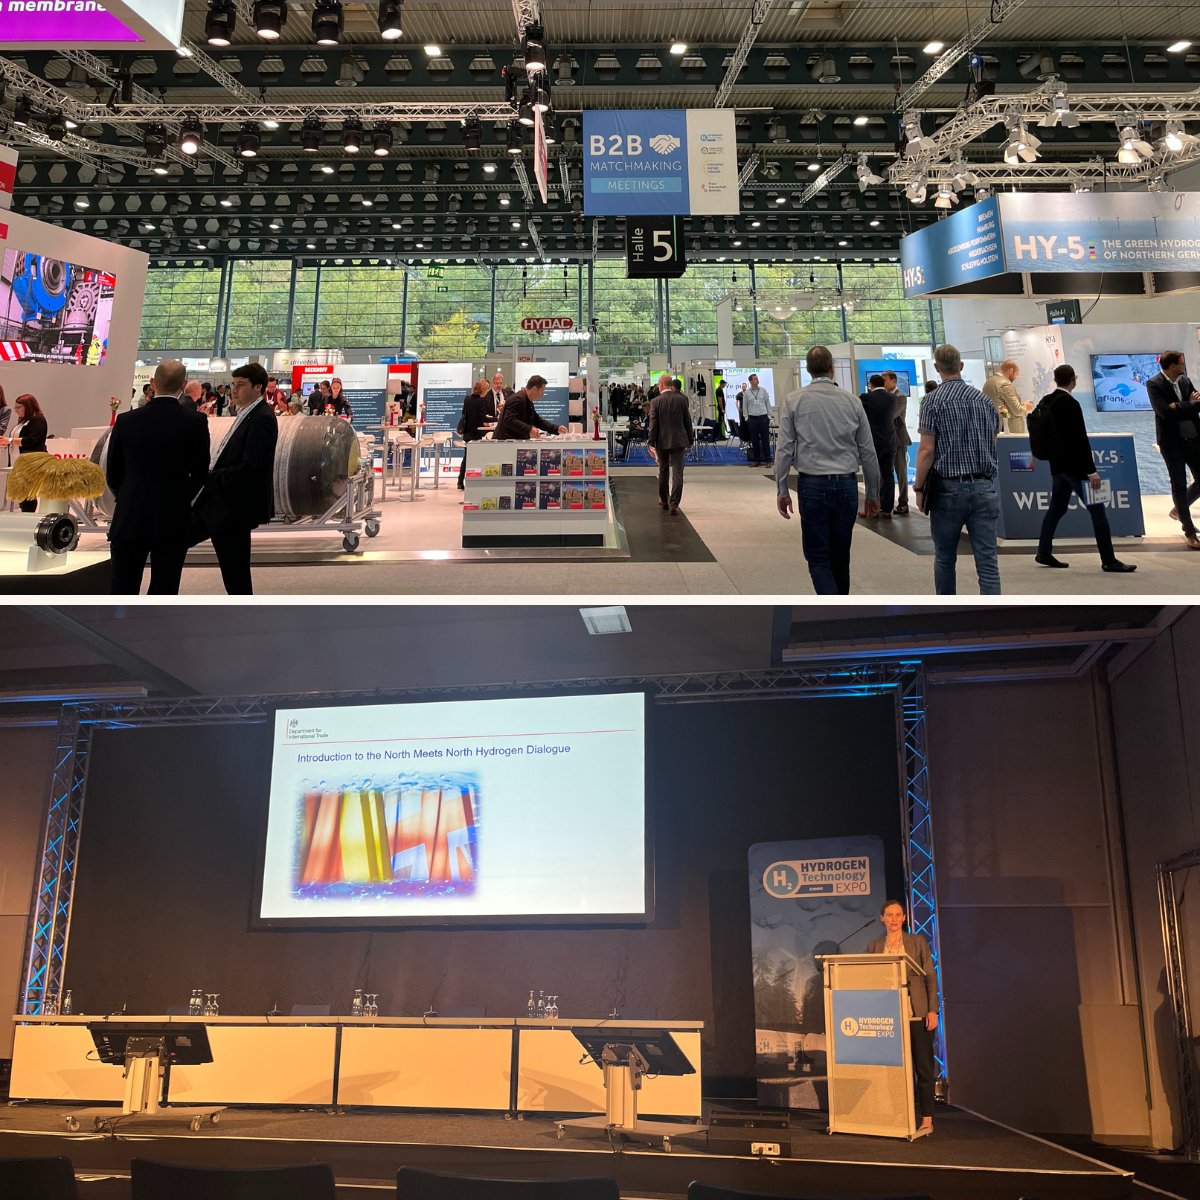 📢 The Advanced Manufacturing and Low Carbon team are at @expo_hydrogen in Bremen this week to promote #hydrogen opportunities in #GreaterManchester and promote closer collaboration between the Northern Powerhouse and Northern Germany. #MIDAS #Hydrogen #manufacturing